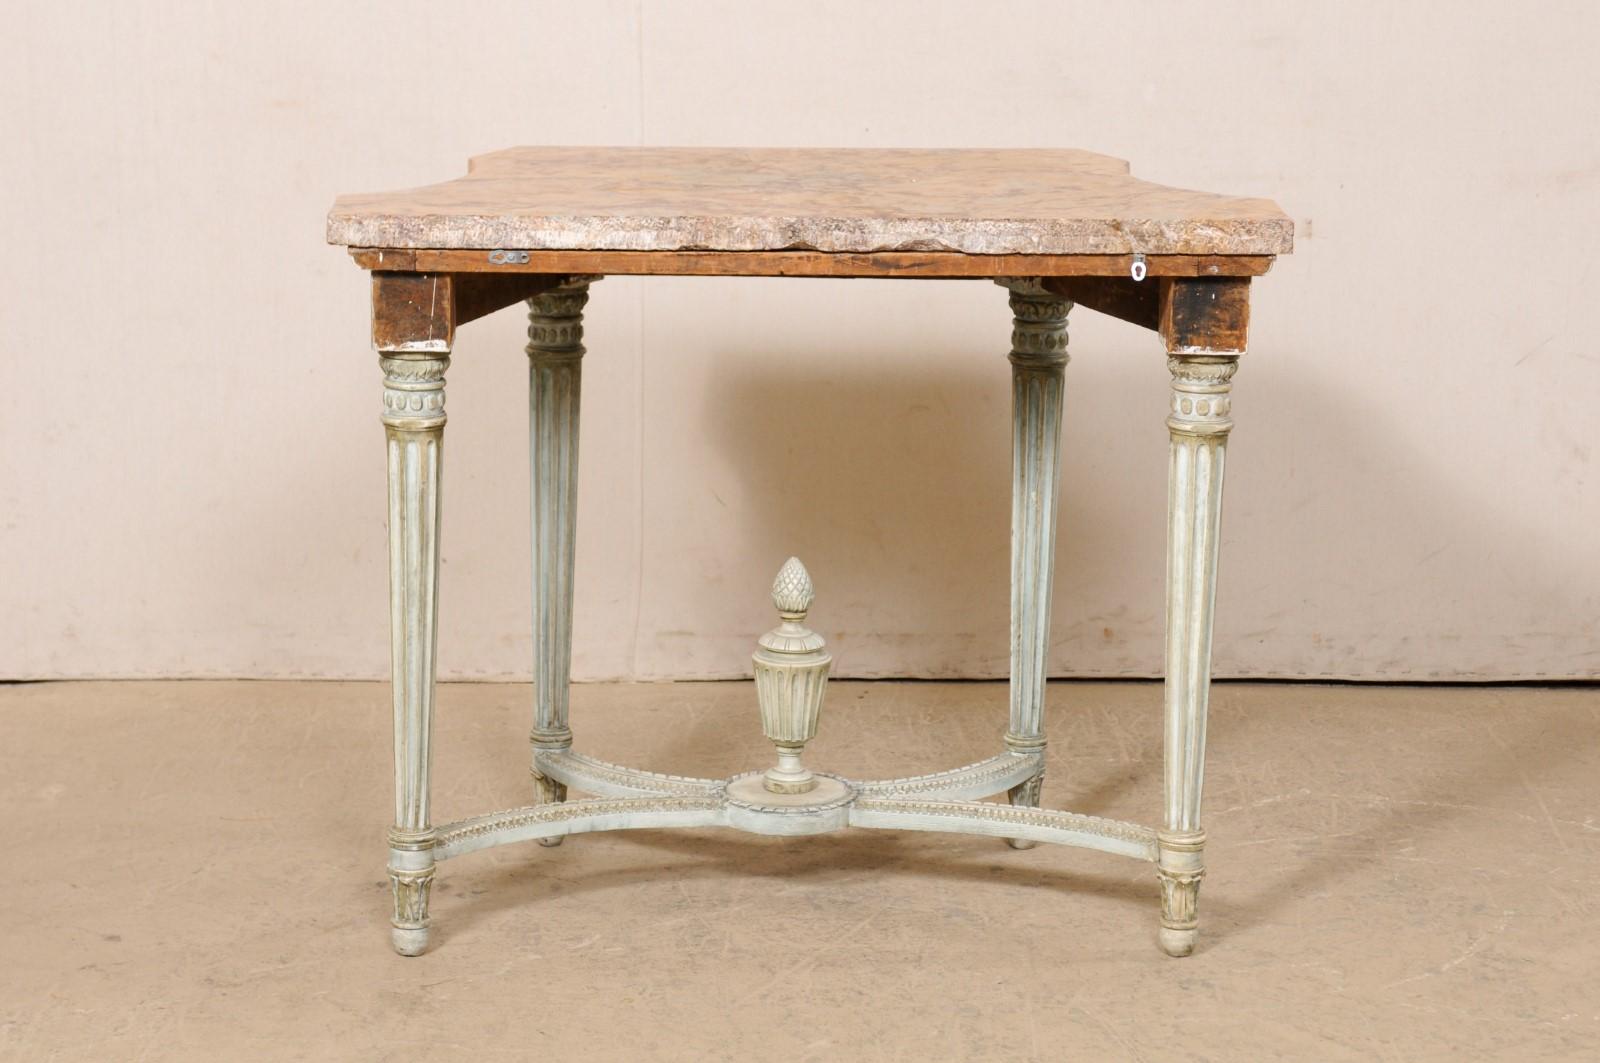 French Neoclassic Period Marble Top Console w/Carved Urn Finial at Underside For Sale 2